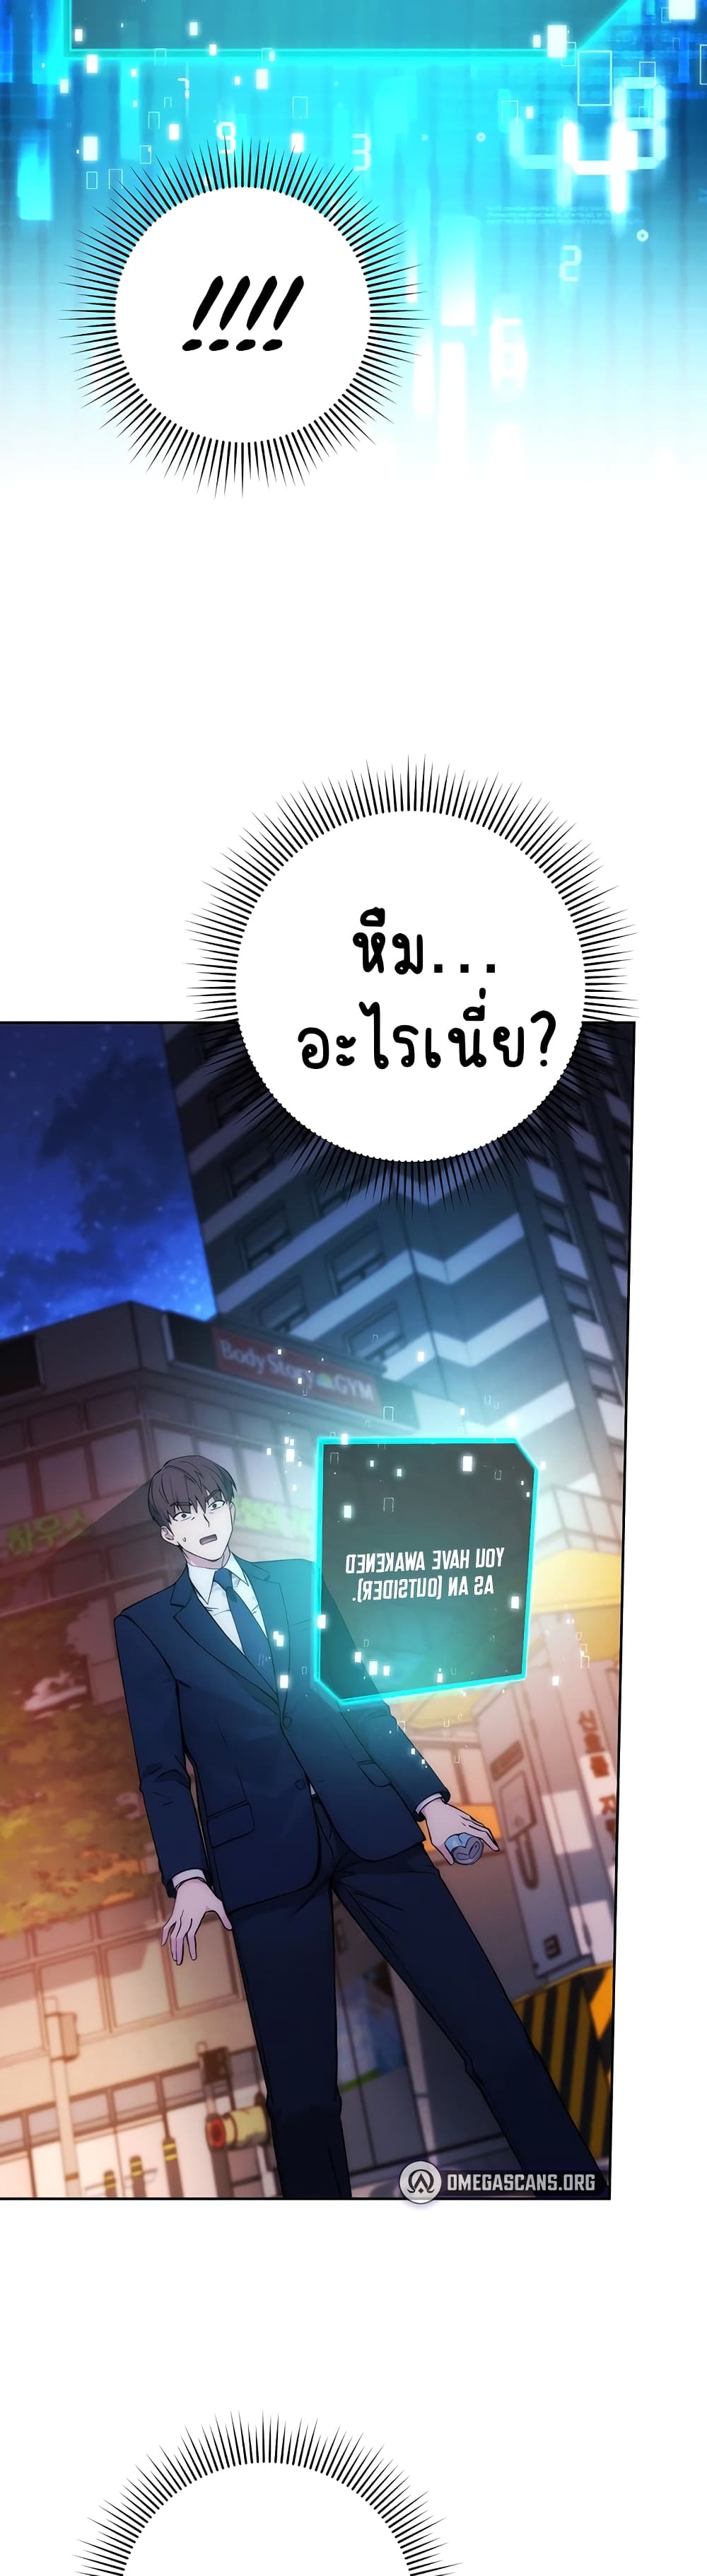 Outsider: The Invisible Man ตอนที่ 1 ภาพ 60